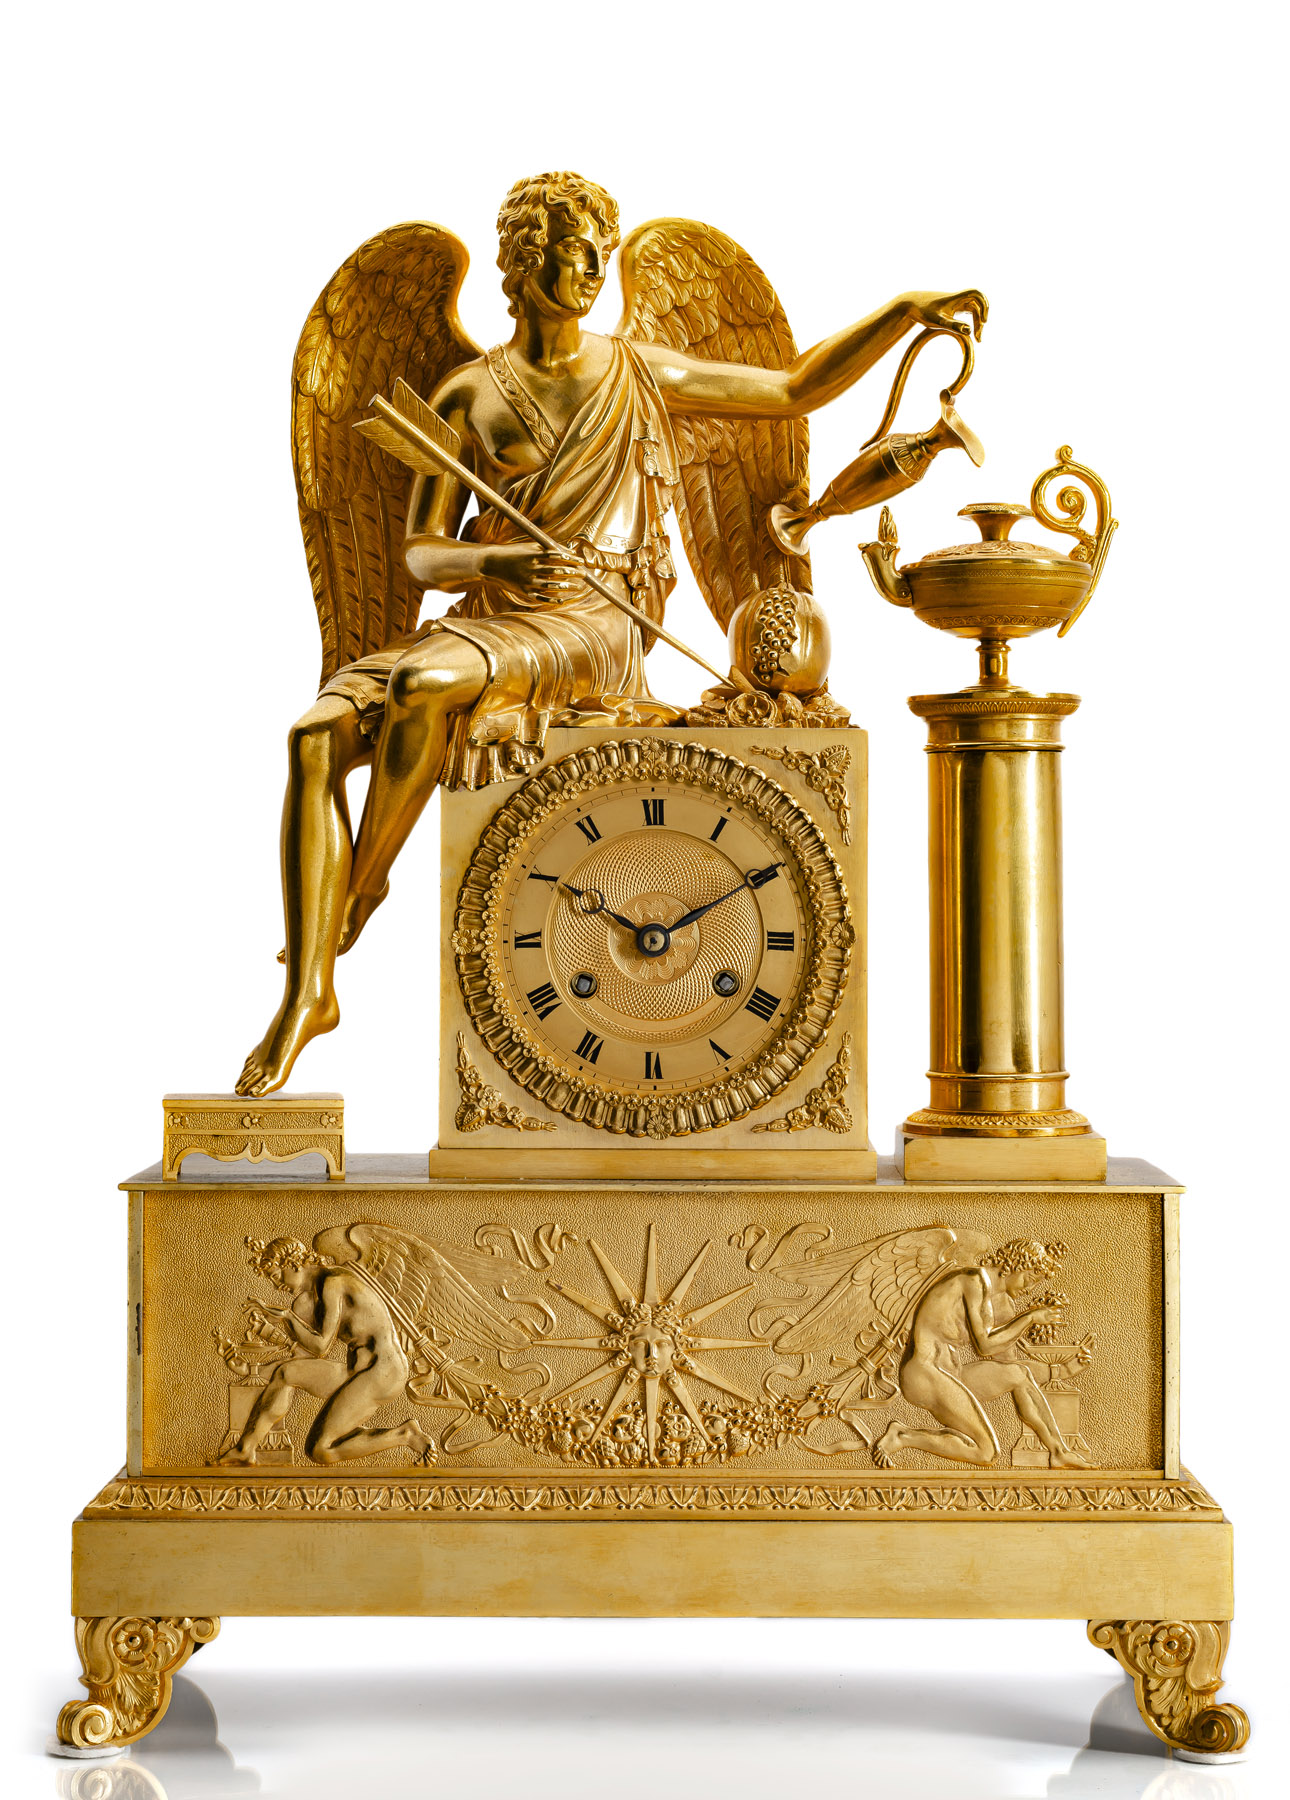 A FRENCH BRONZEGILT CHARLES X MANTLE CLOCK WITH AMOR